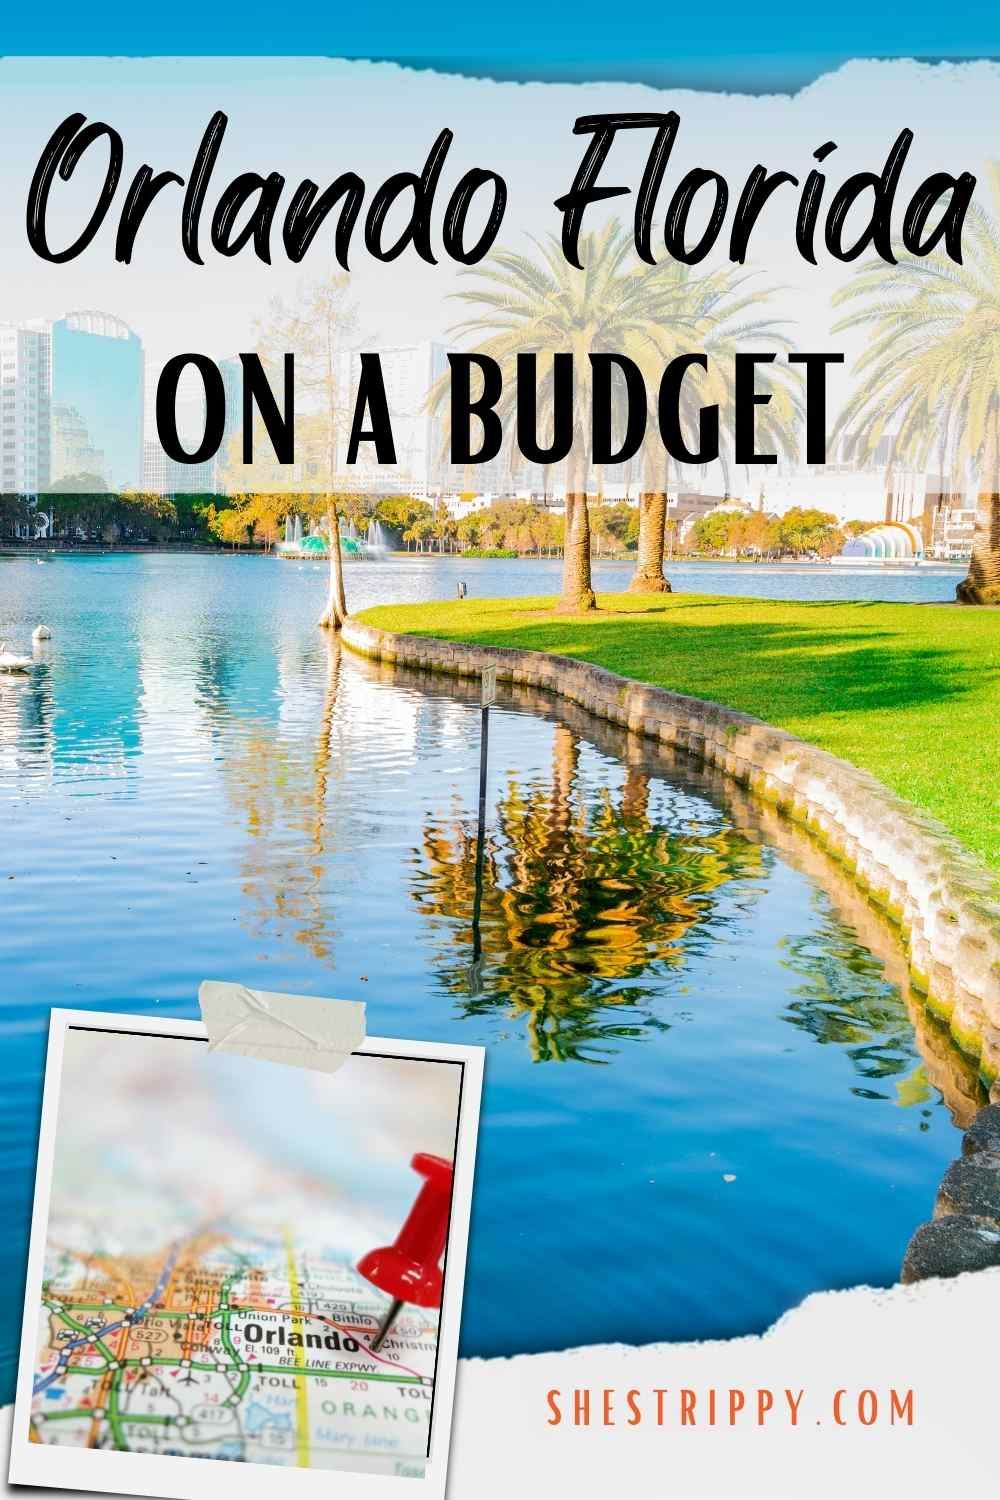 Even without a budget for attractions, Orlando, Florida, offers a plethora of free and exciting activities that can make for a memorable visit. Let's get to exploring Orlando Florida on a budget so I can show you just what I mean. #orlandoflorida #florida #travelflorida